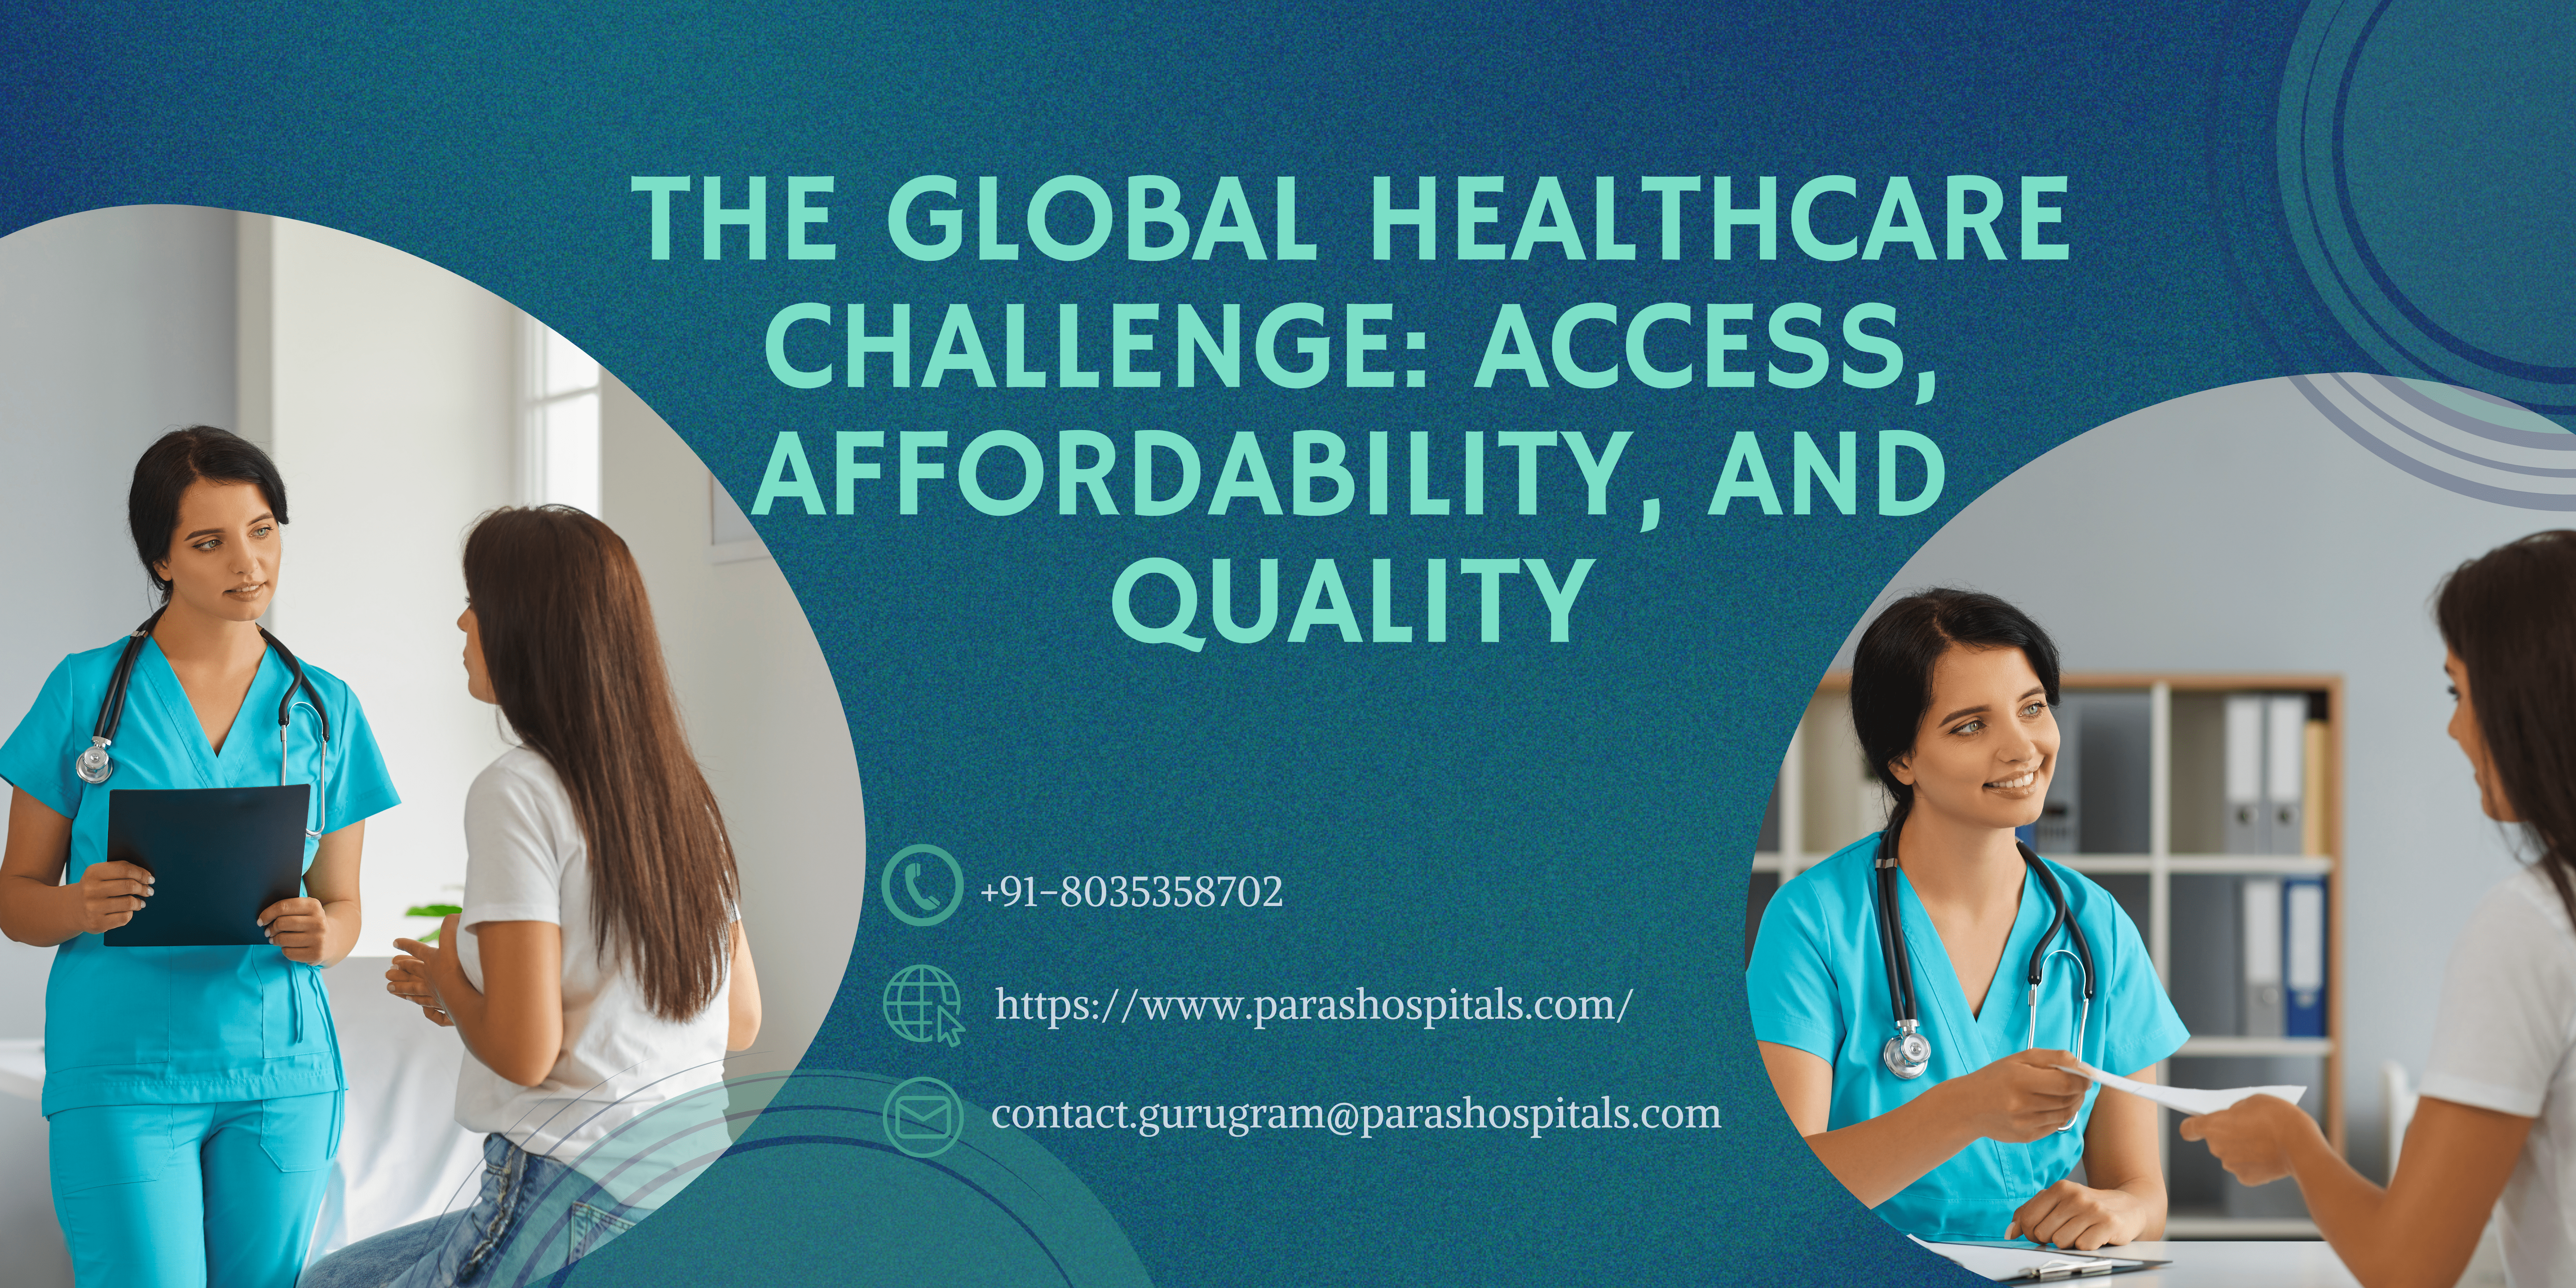 The Global Healthcare Challenge: Access, Affordability, and Quality